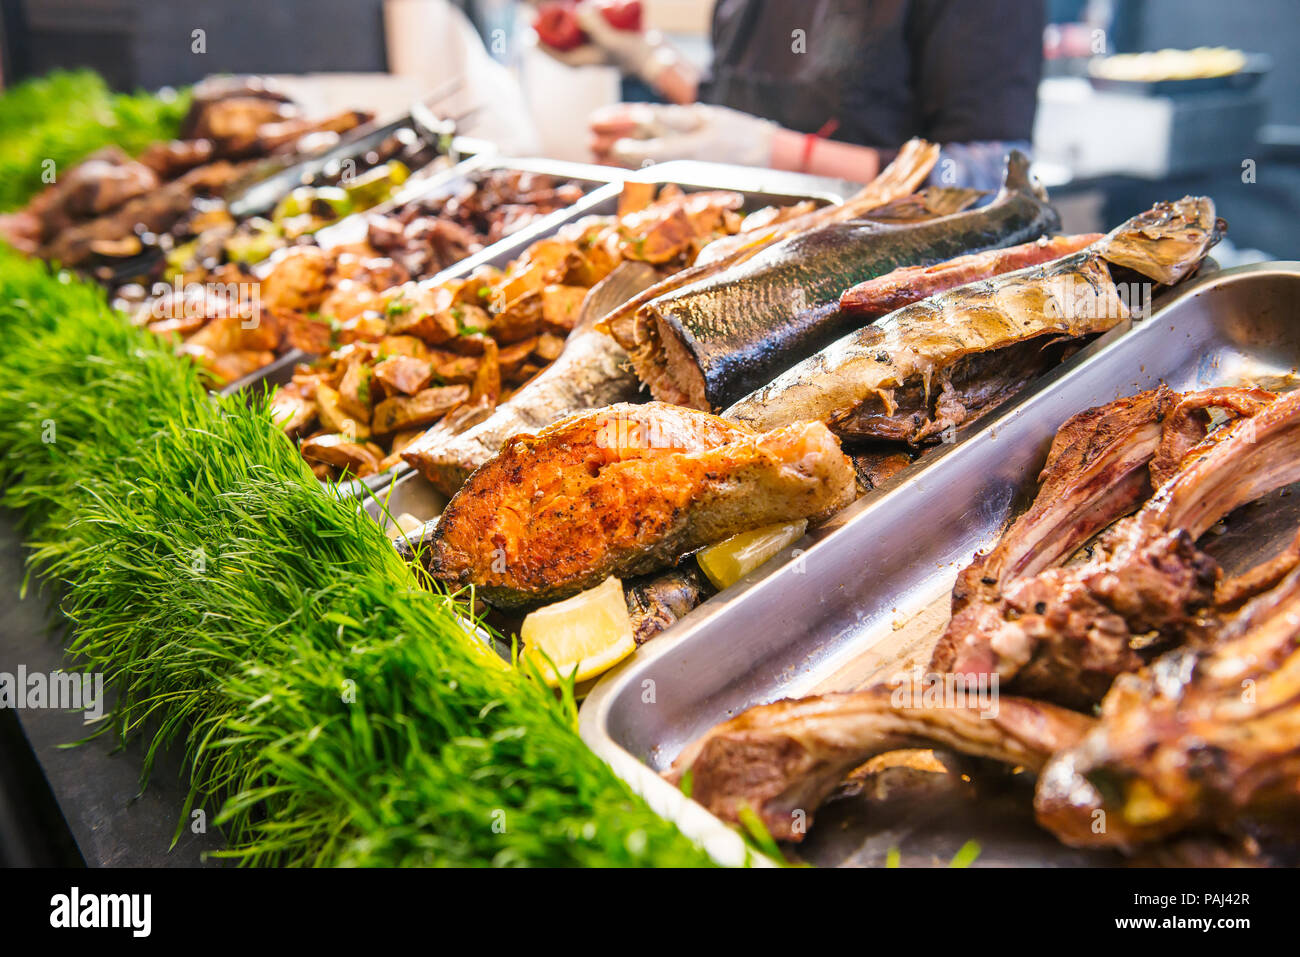 Outdoor Cuisine Culinary Buffet with healthy take away meal - grilled vegetables, fish and meat on the street food culinary market, festival, event. S Stock Photo